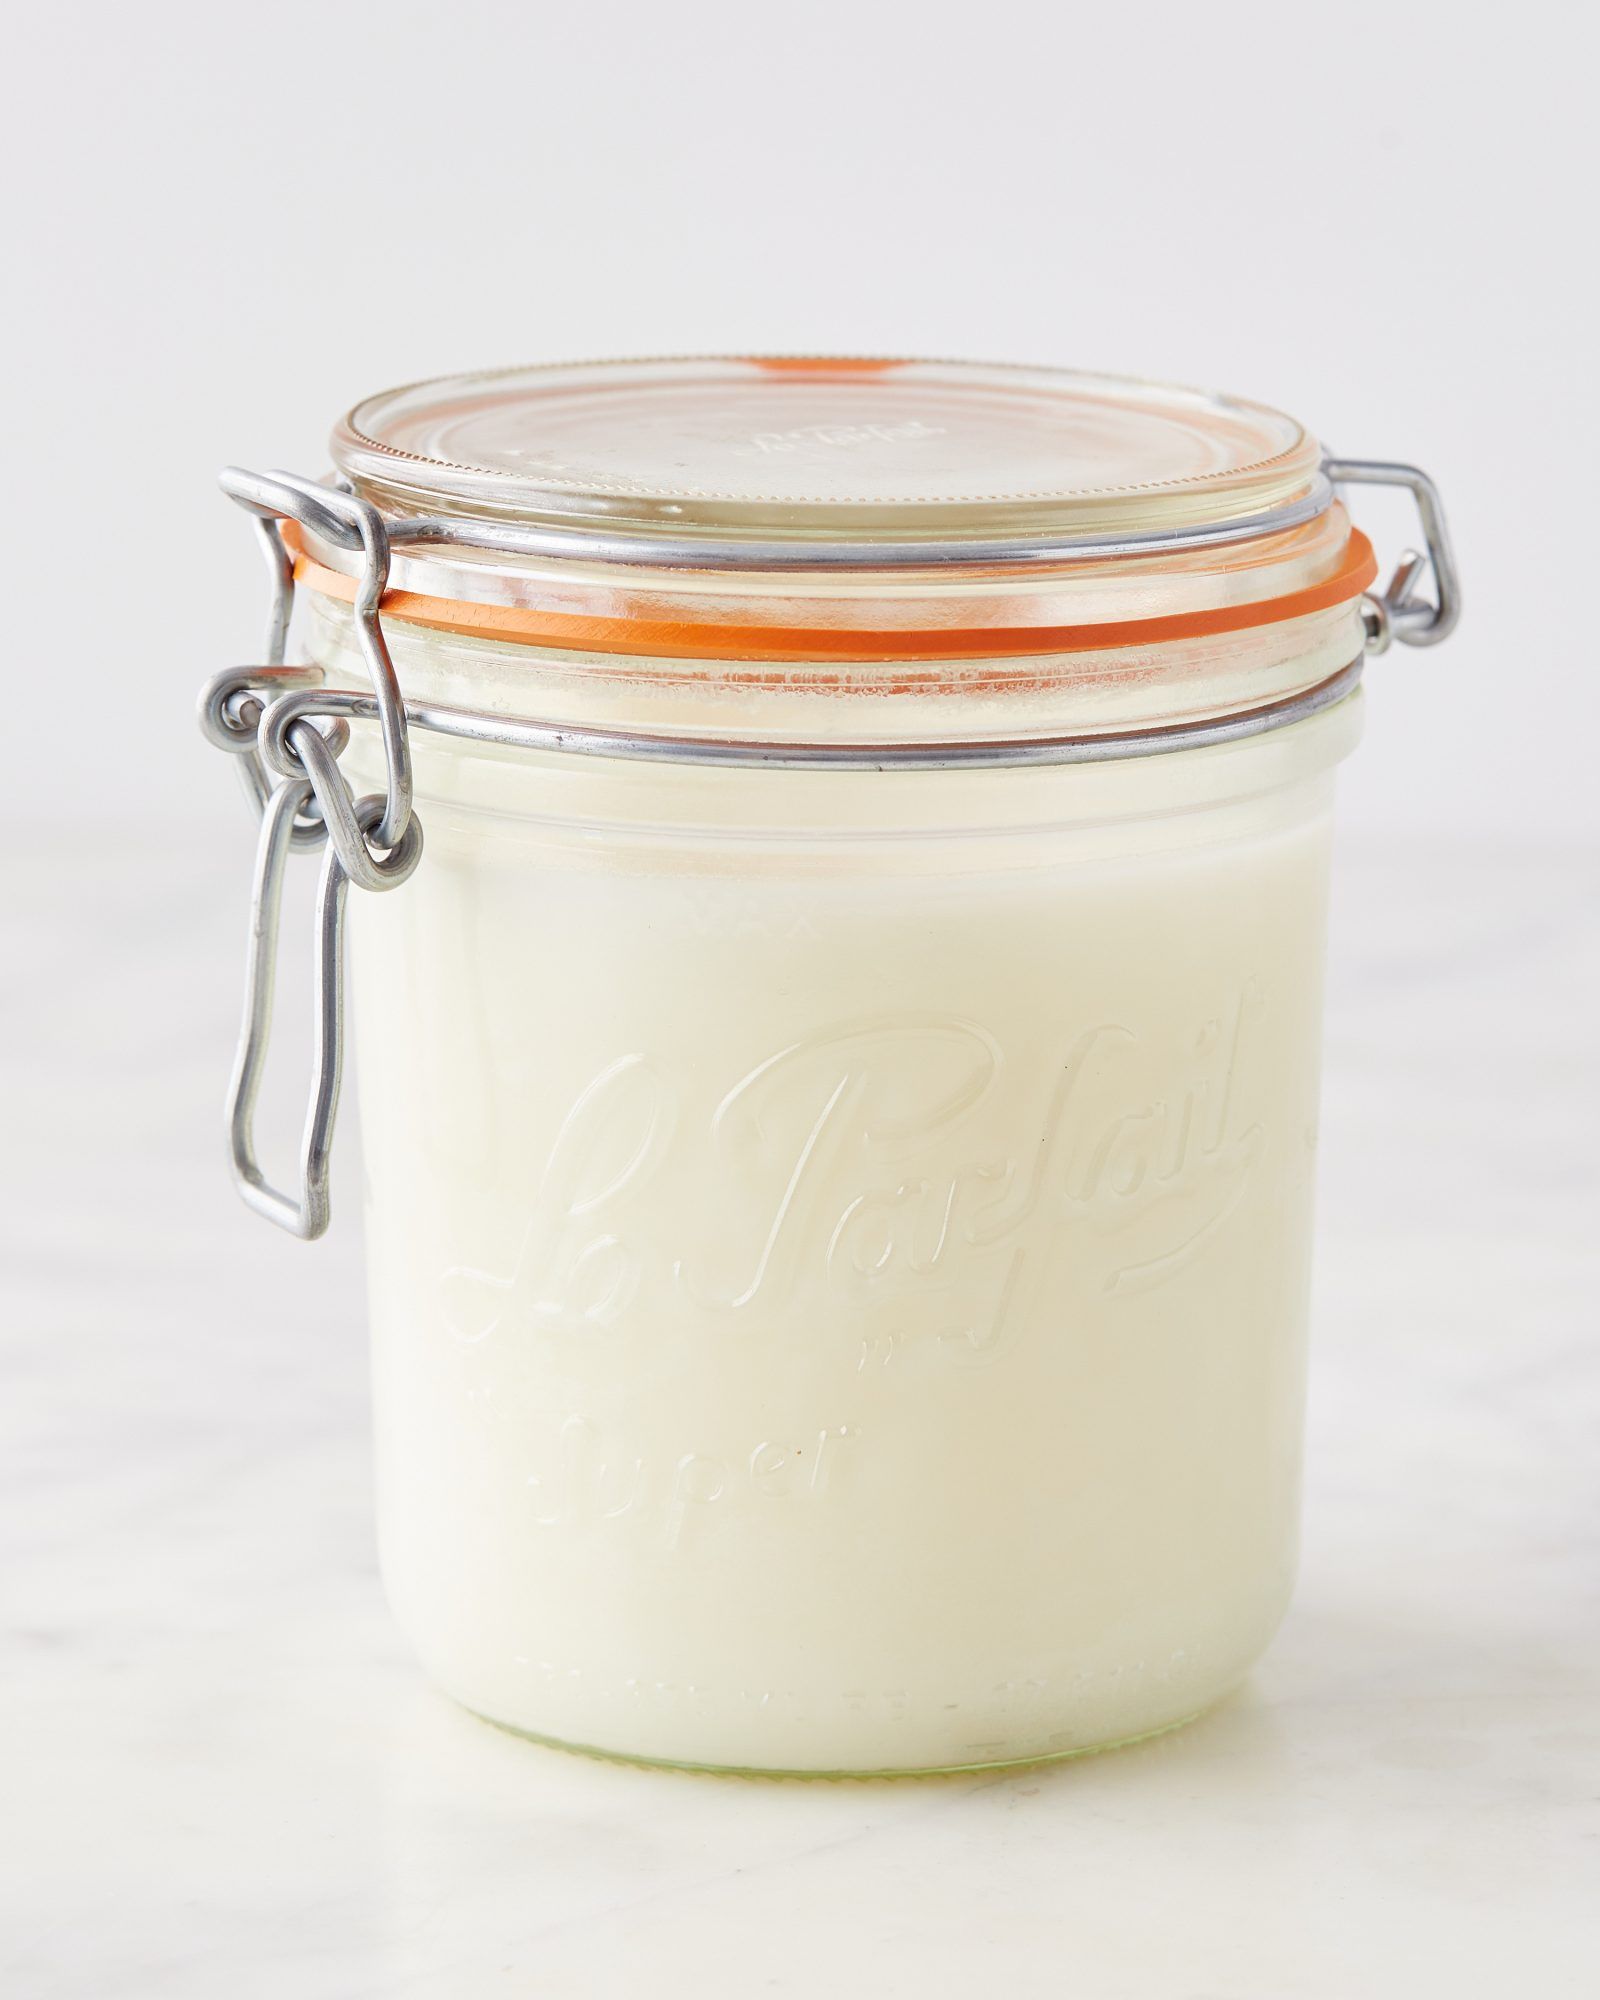 Why You'll Want to Cook and Bake with Leaf Lard